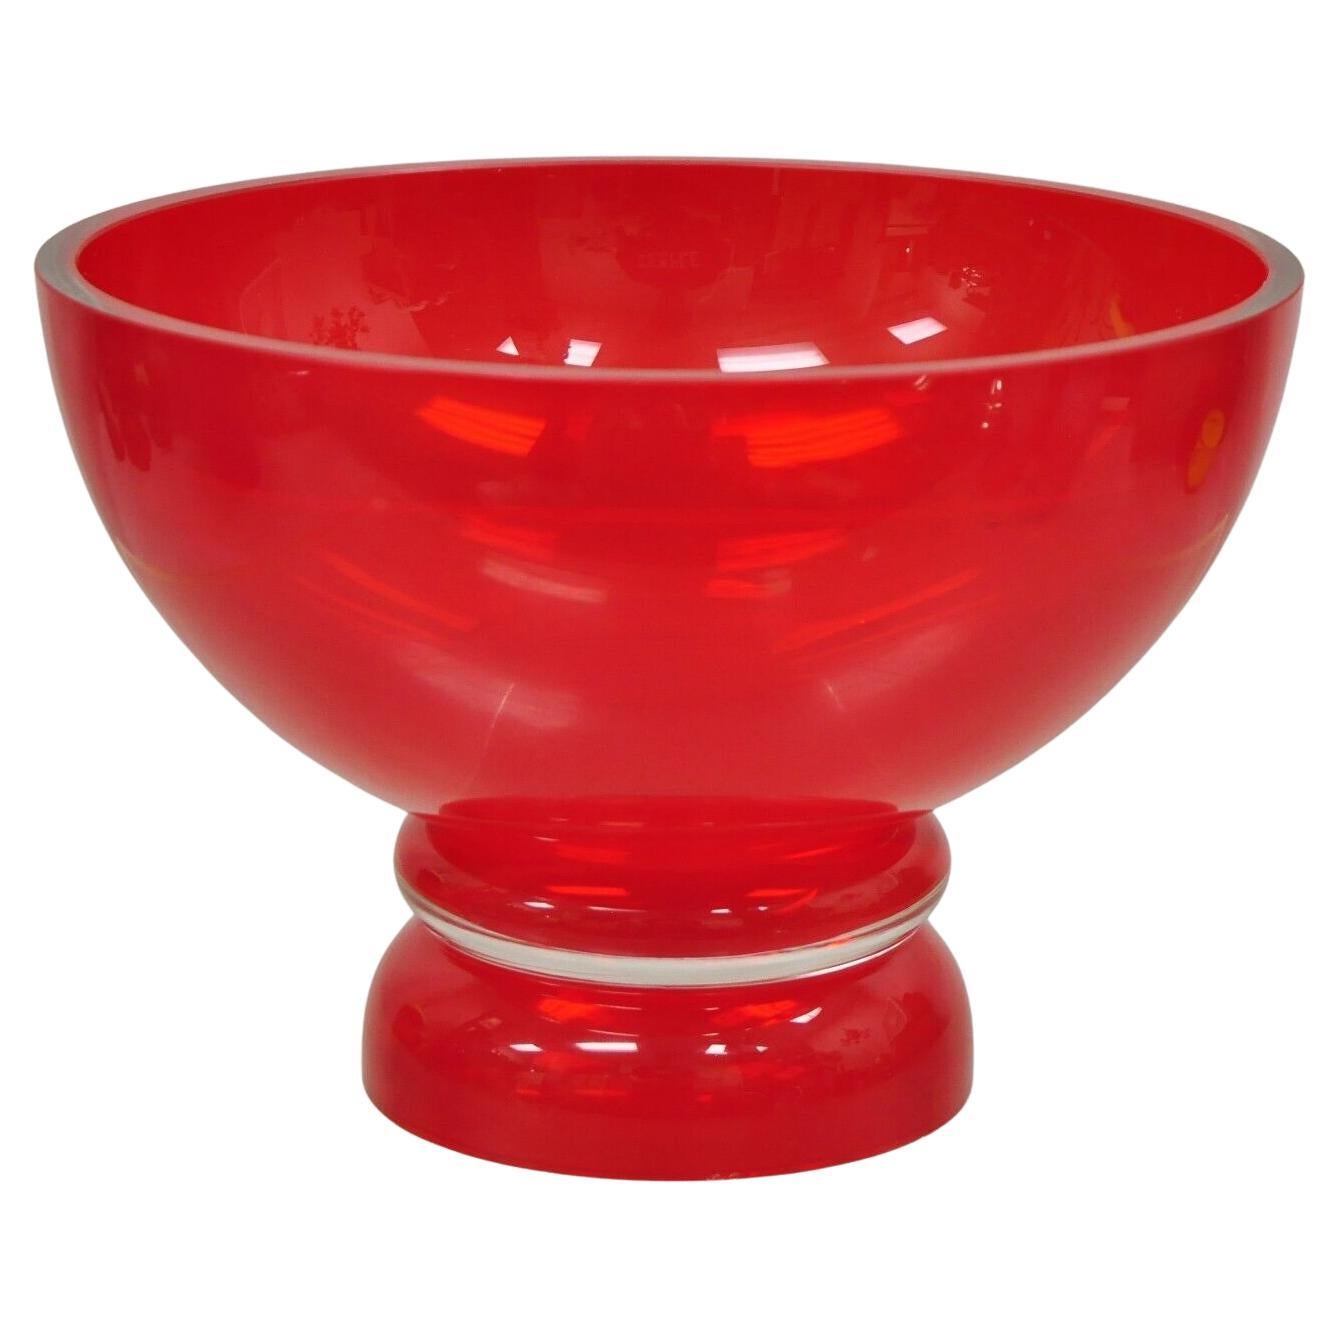 Vintage Marquis Waterford Red Tango Footed Modern Bowl